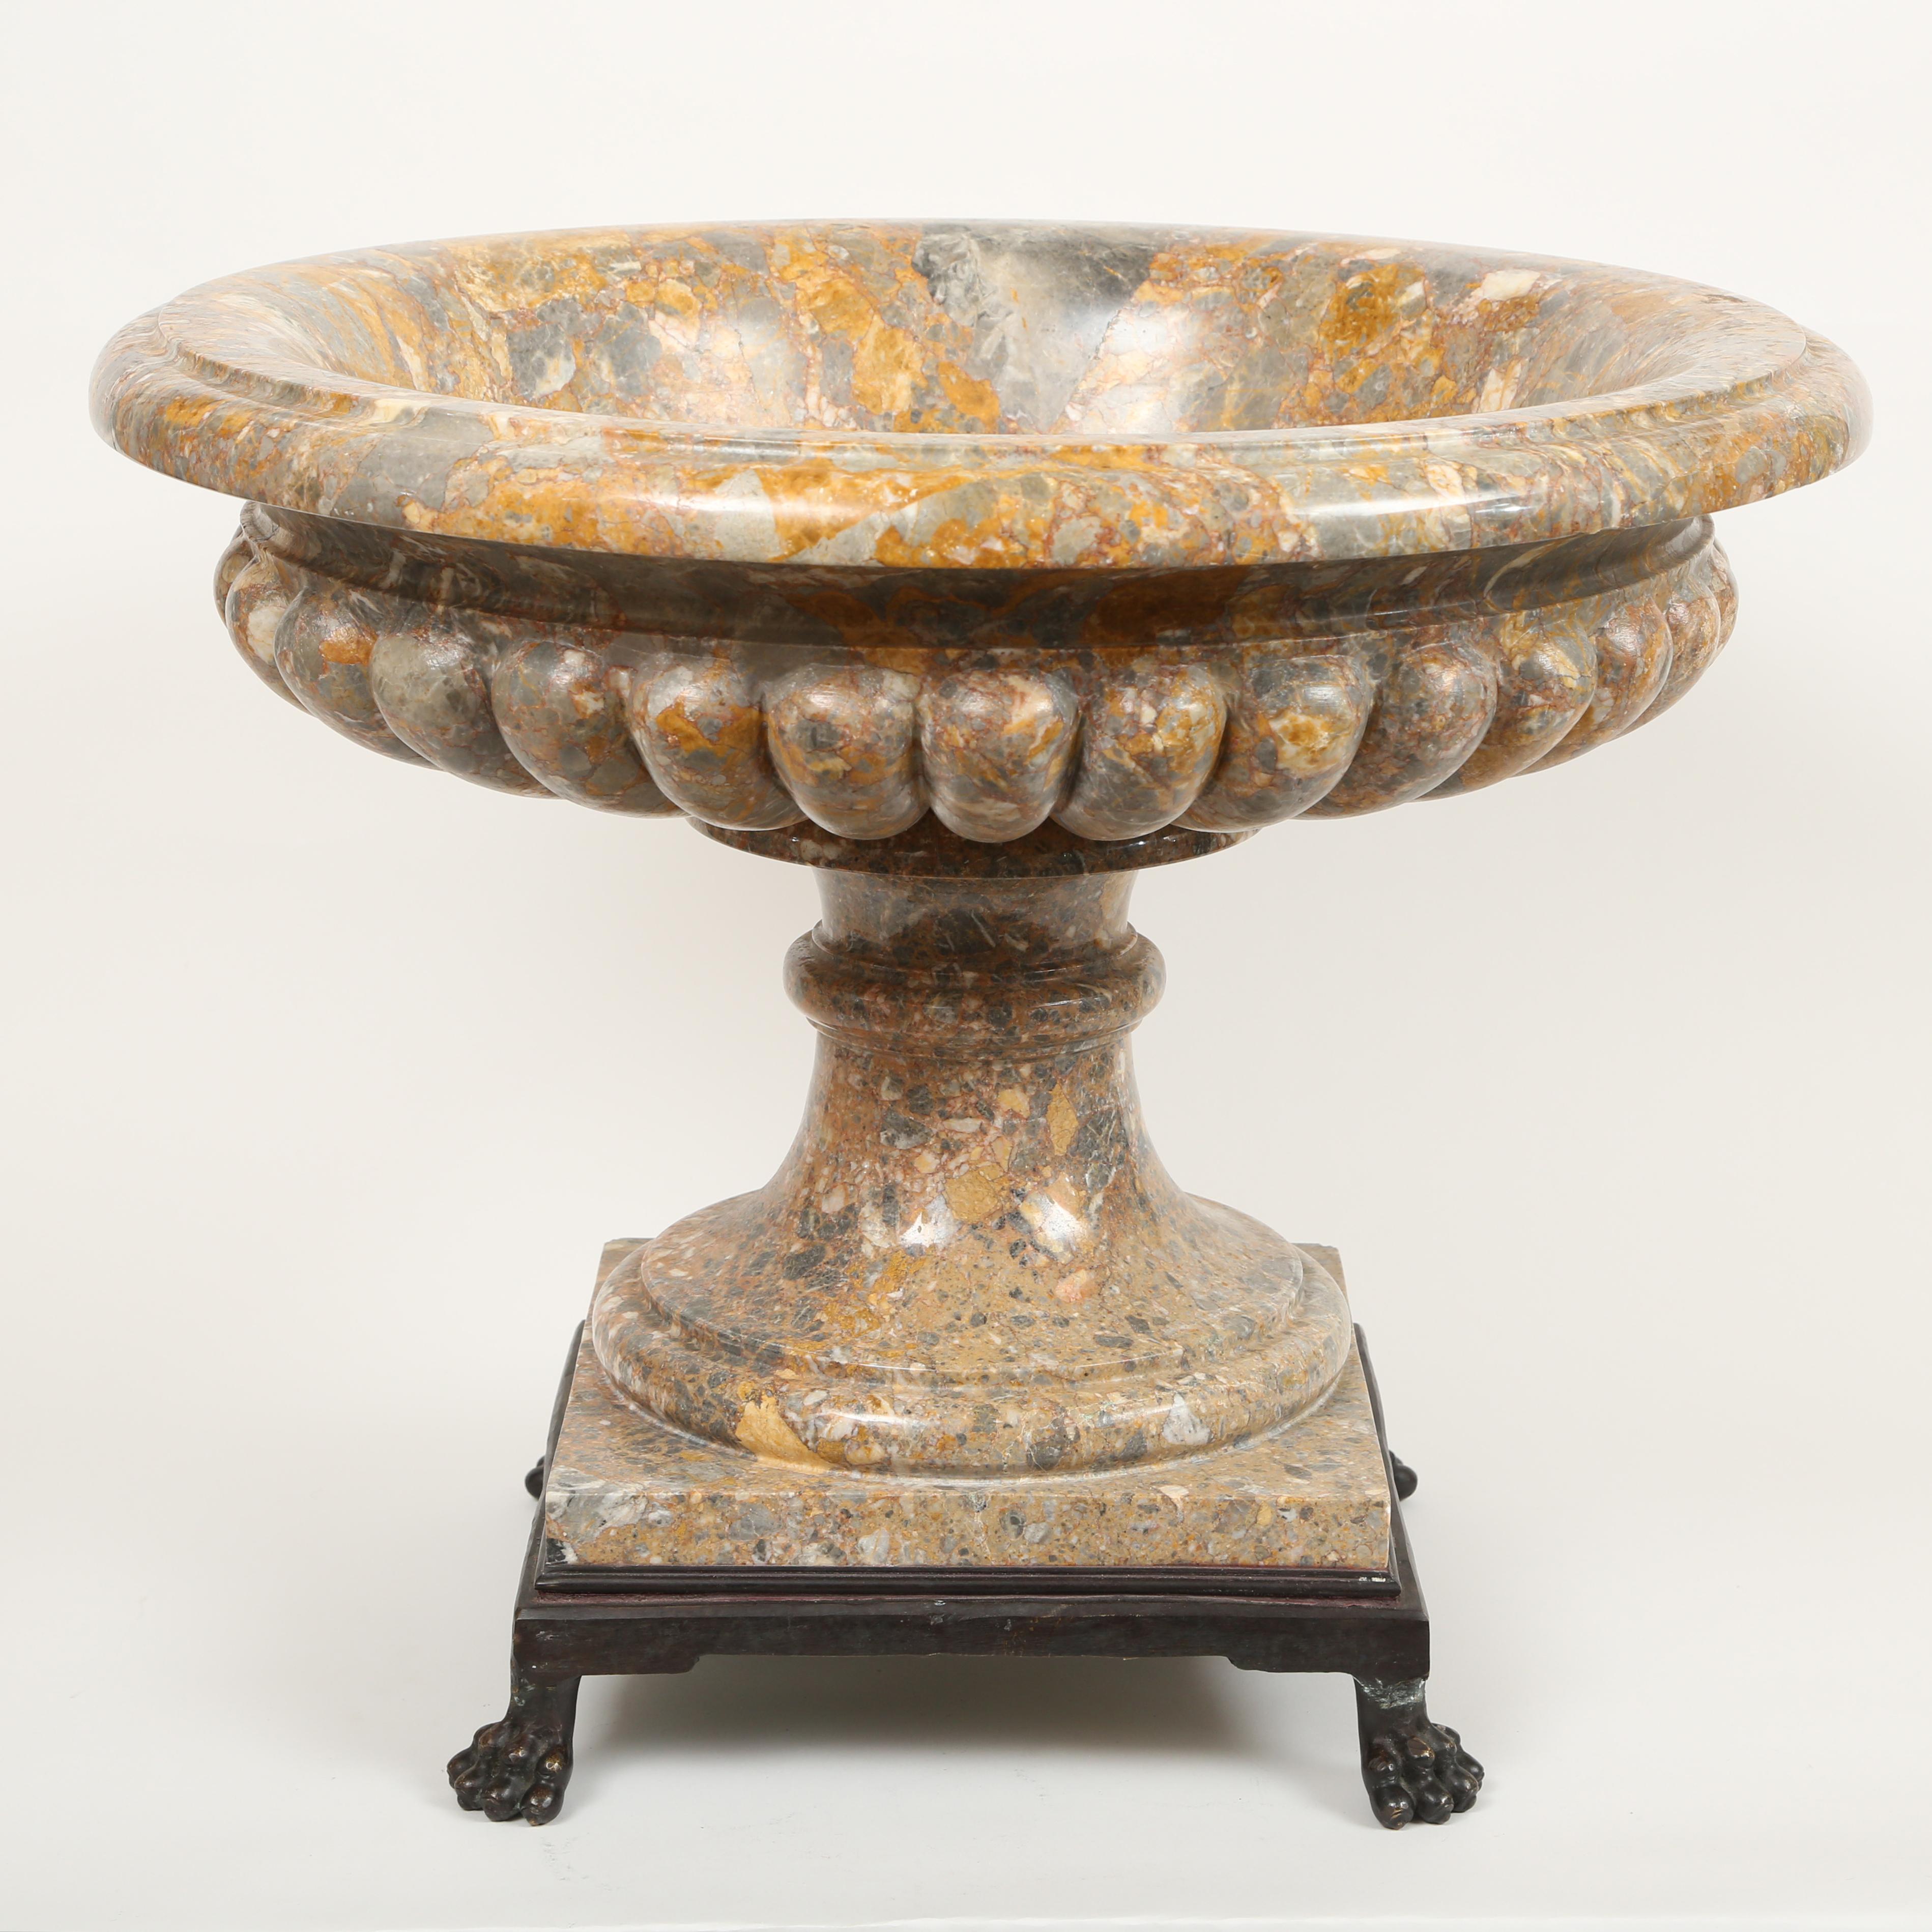 Large neoclassical wide mouthed tazza style shallow marble urn. The urn with everted rim has lobed or ribbed sides. The bowl of the two part urn sits on a circular socle and square base. The entire piece fits into an iron base with lion's paws.
The